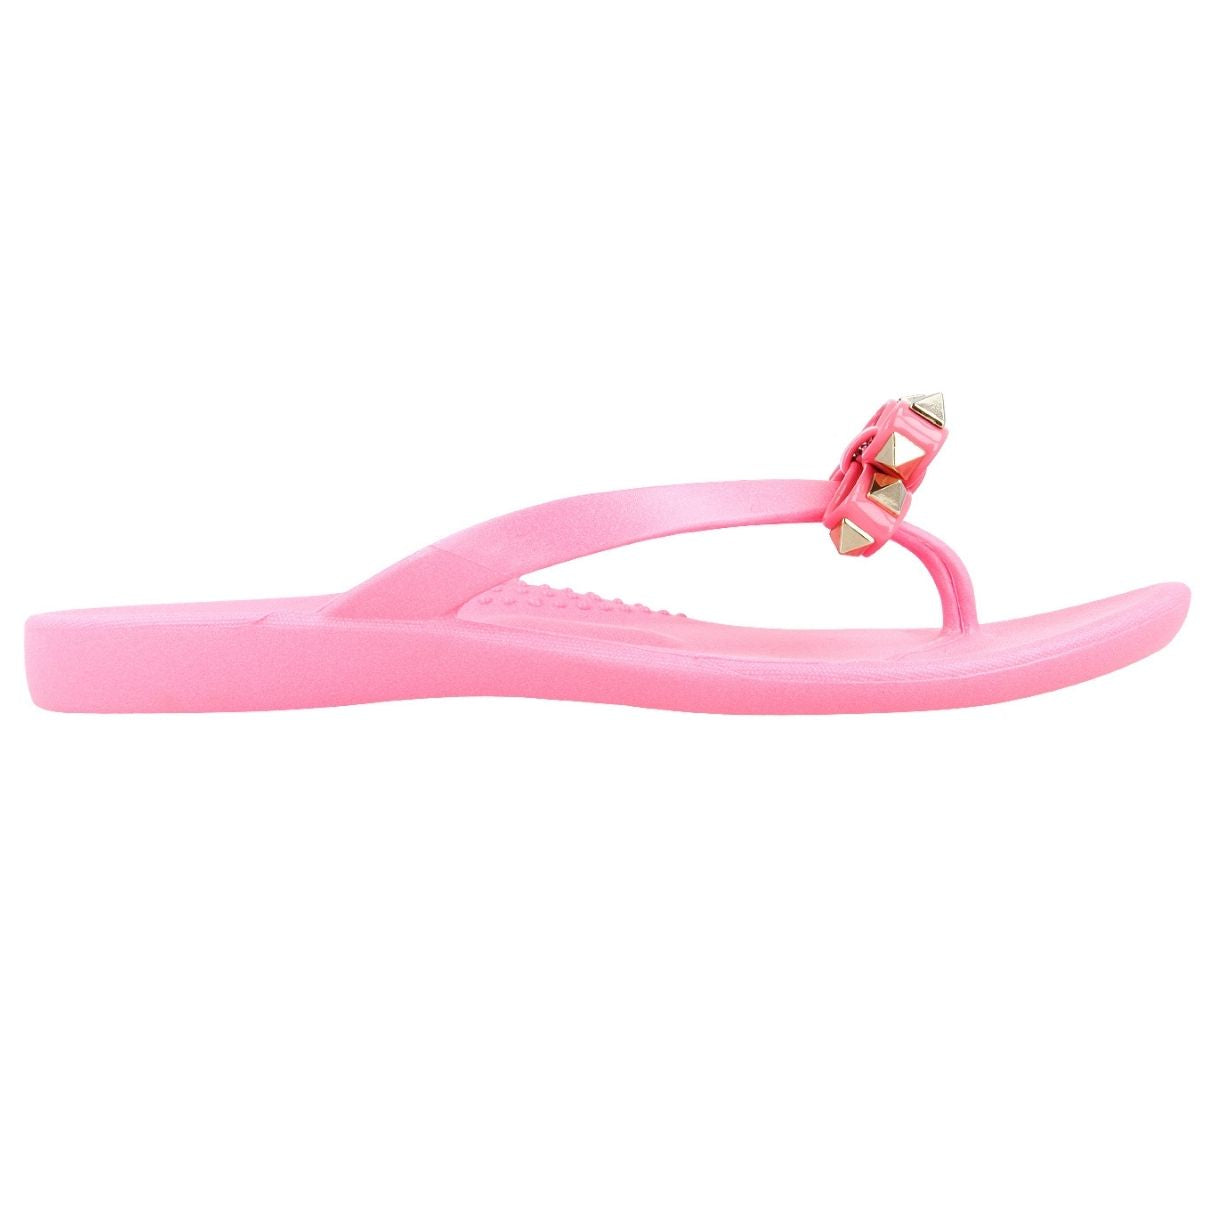 Oka-B Chase Women's Flip Flop with Bold Bow